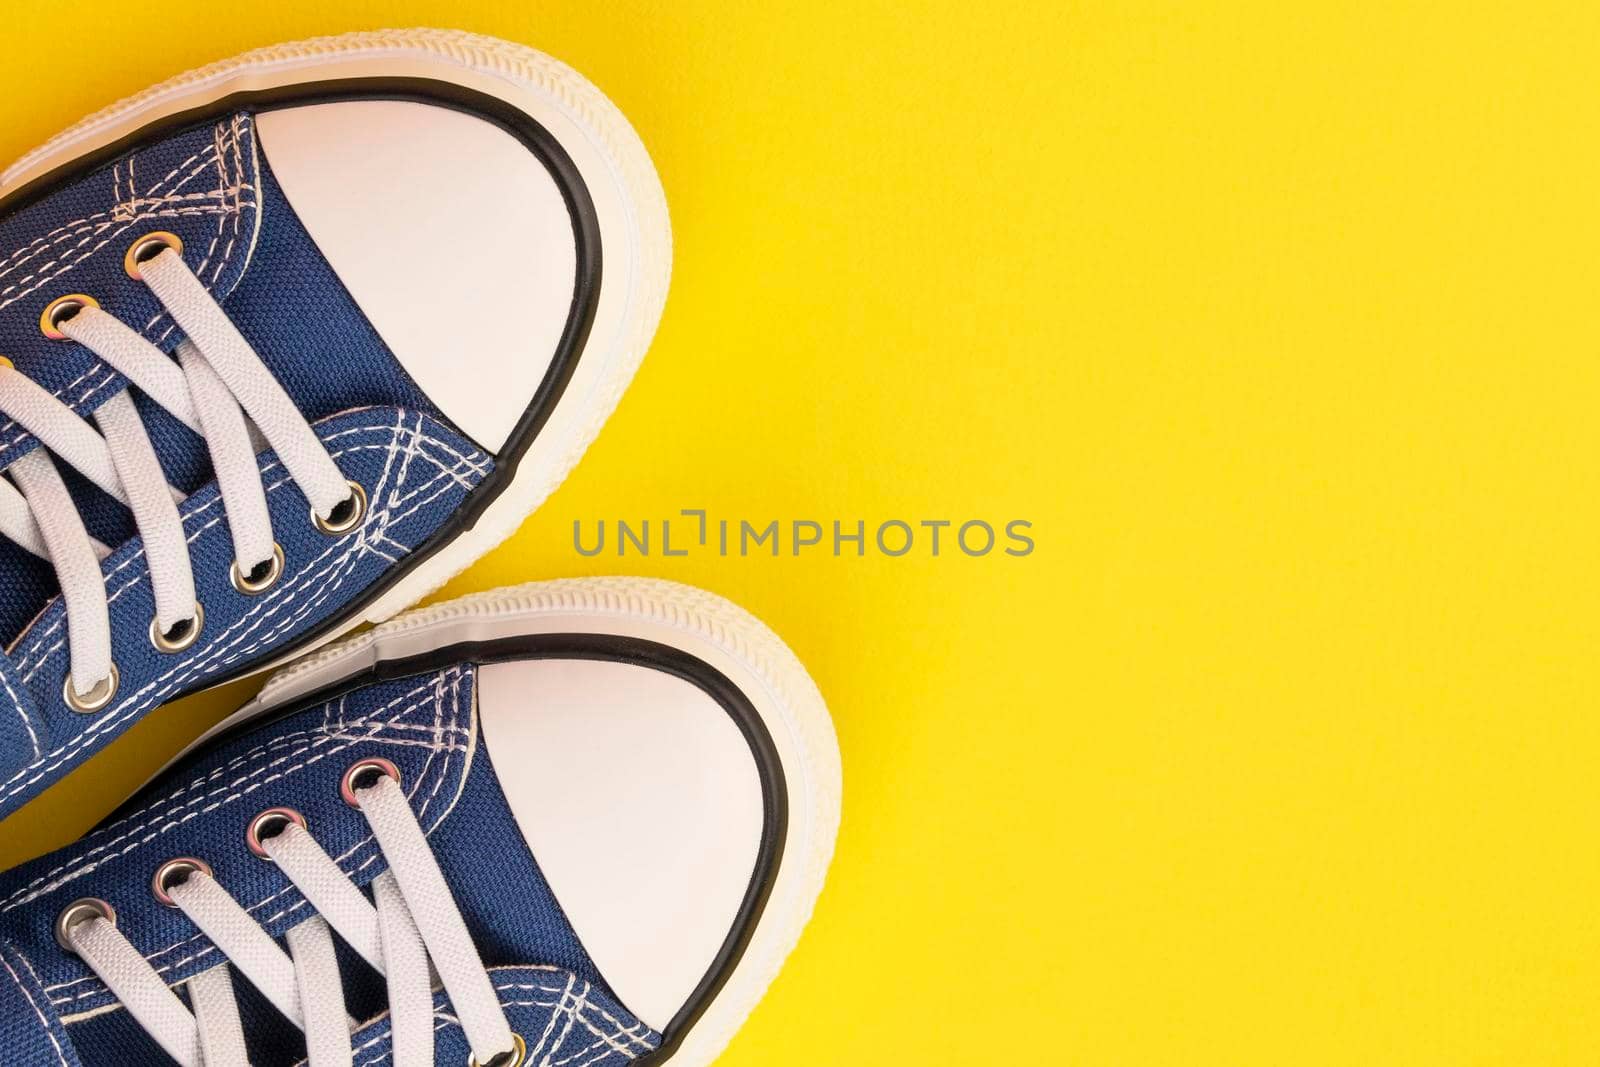 a pair of blue sneakers on a yellow background by audiznam2609